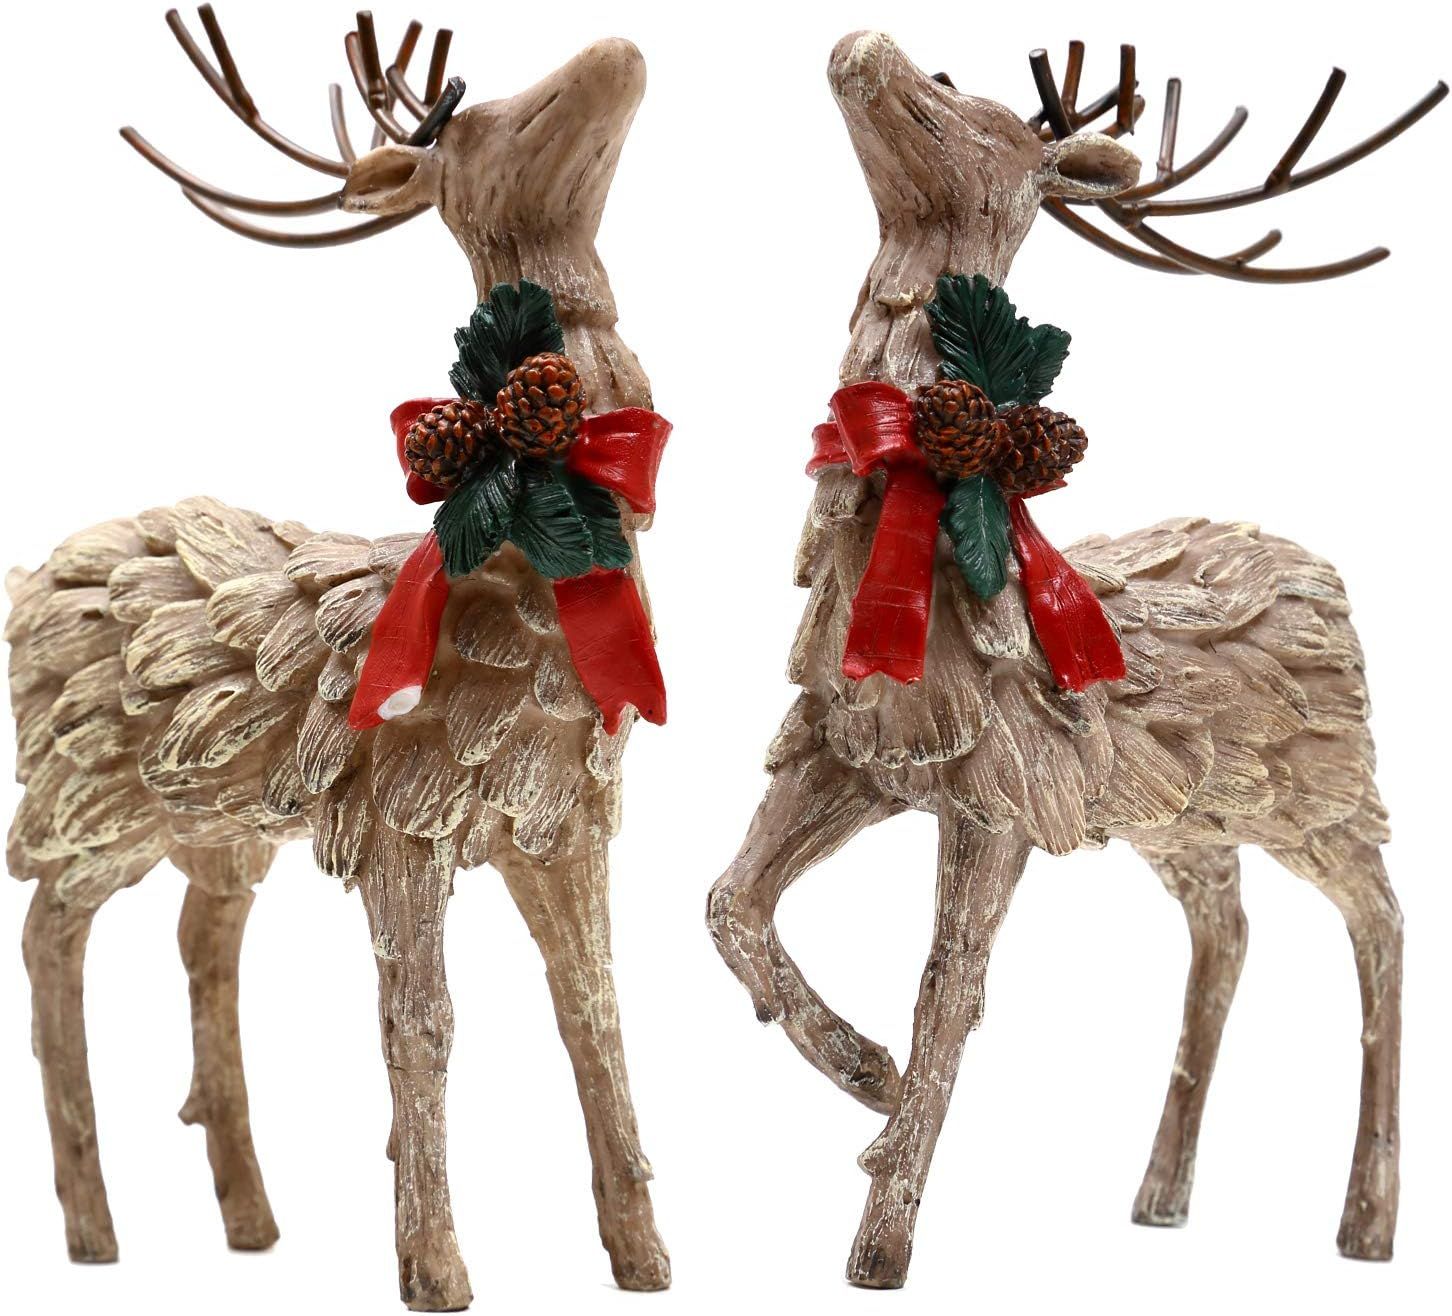 Topadorn Resin Holiday Deer Tabletop Holiday Figurine Christmas Decorative,2 Pack | Amazon (US)